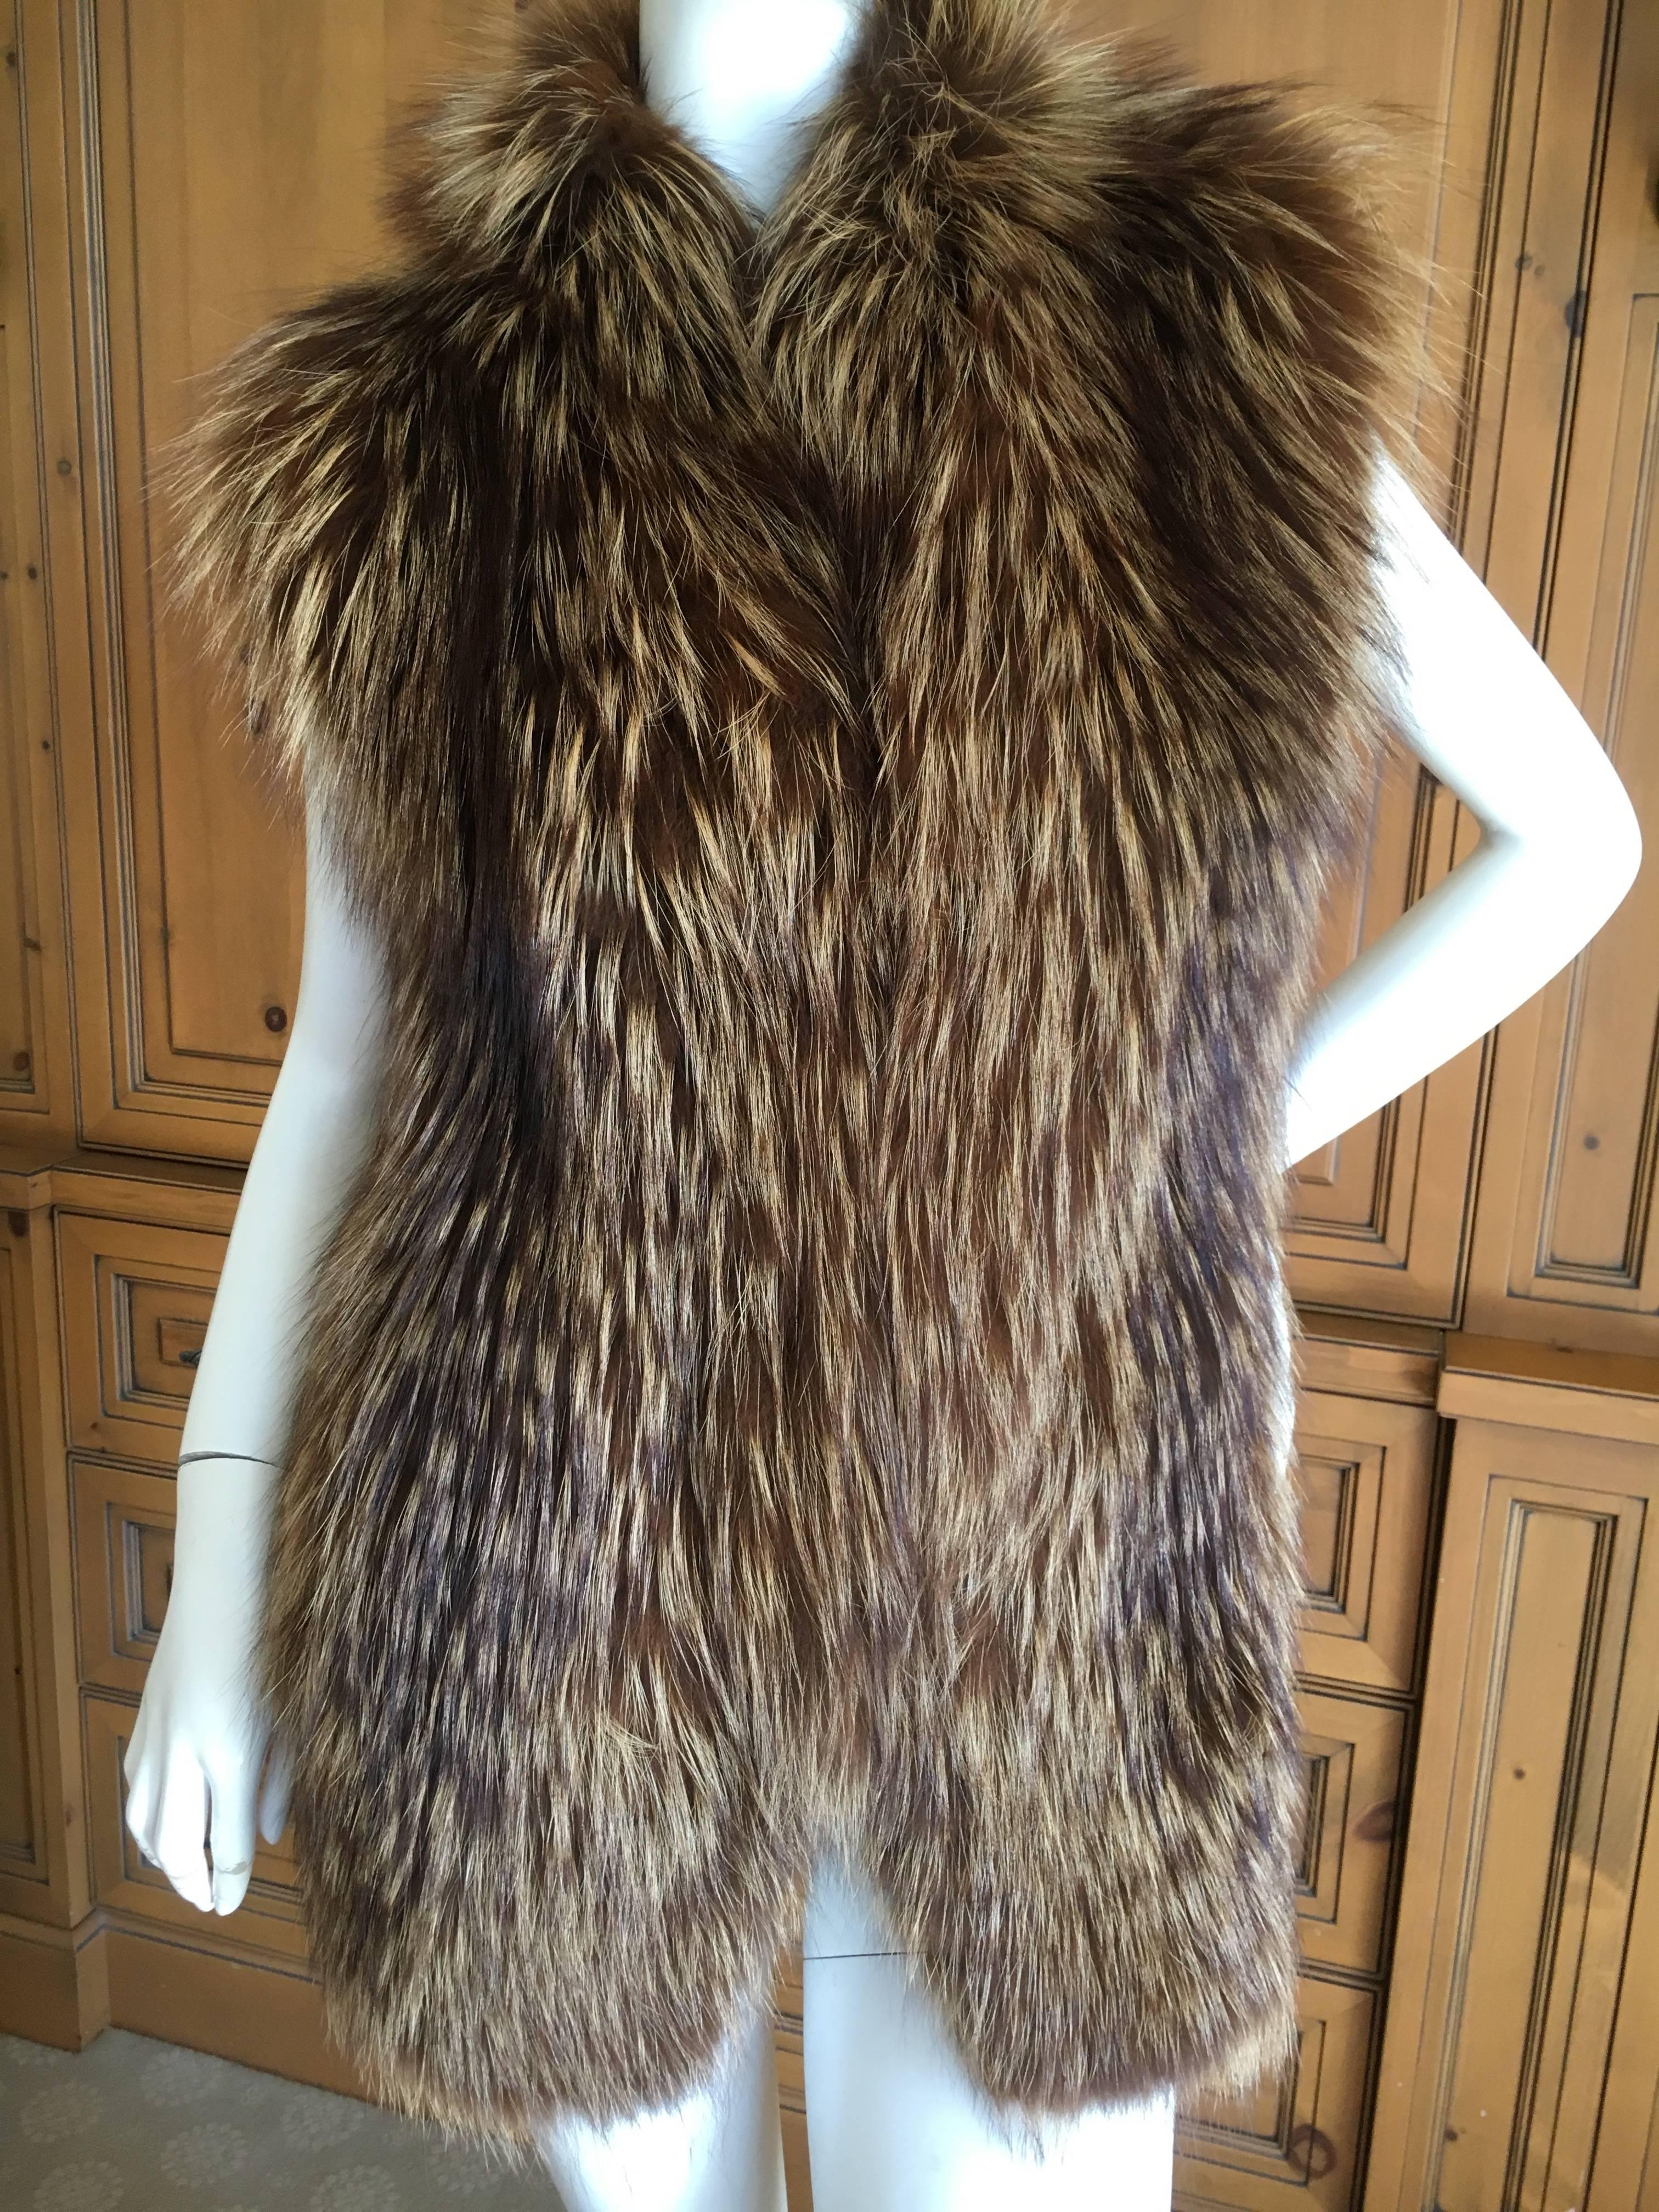 Gucci Fur Vest with Knit Back In Excellent Condition For Sale In Cloverdale, CA